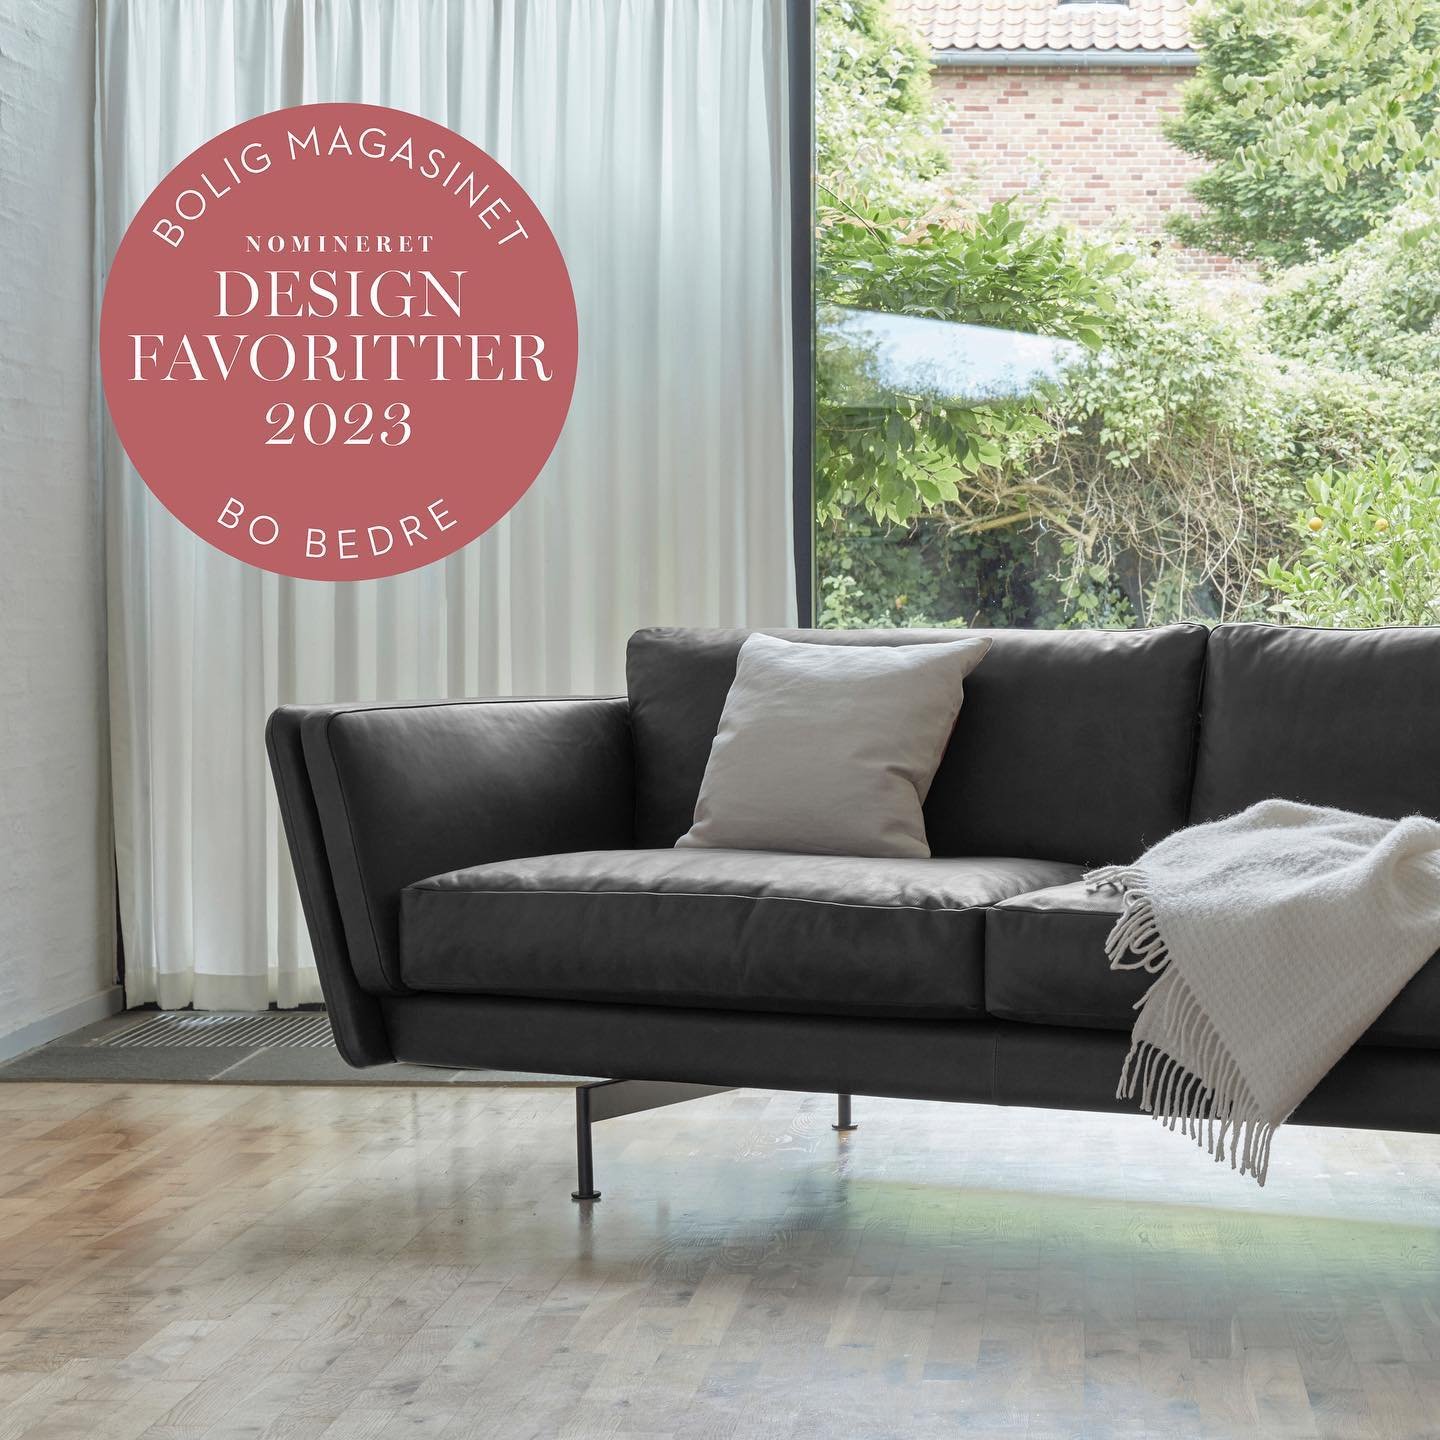 Our Grasp Sofa has been nominated for the danish design award &ldquo;Design Favoritter 2023&rdquo;. An award by the danish magazines @bobedredk &amp; @boligmagasinetdk . If you like the design and think we should win the sofa category, then we would 